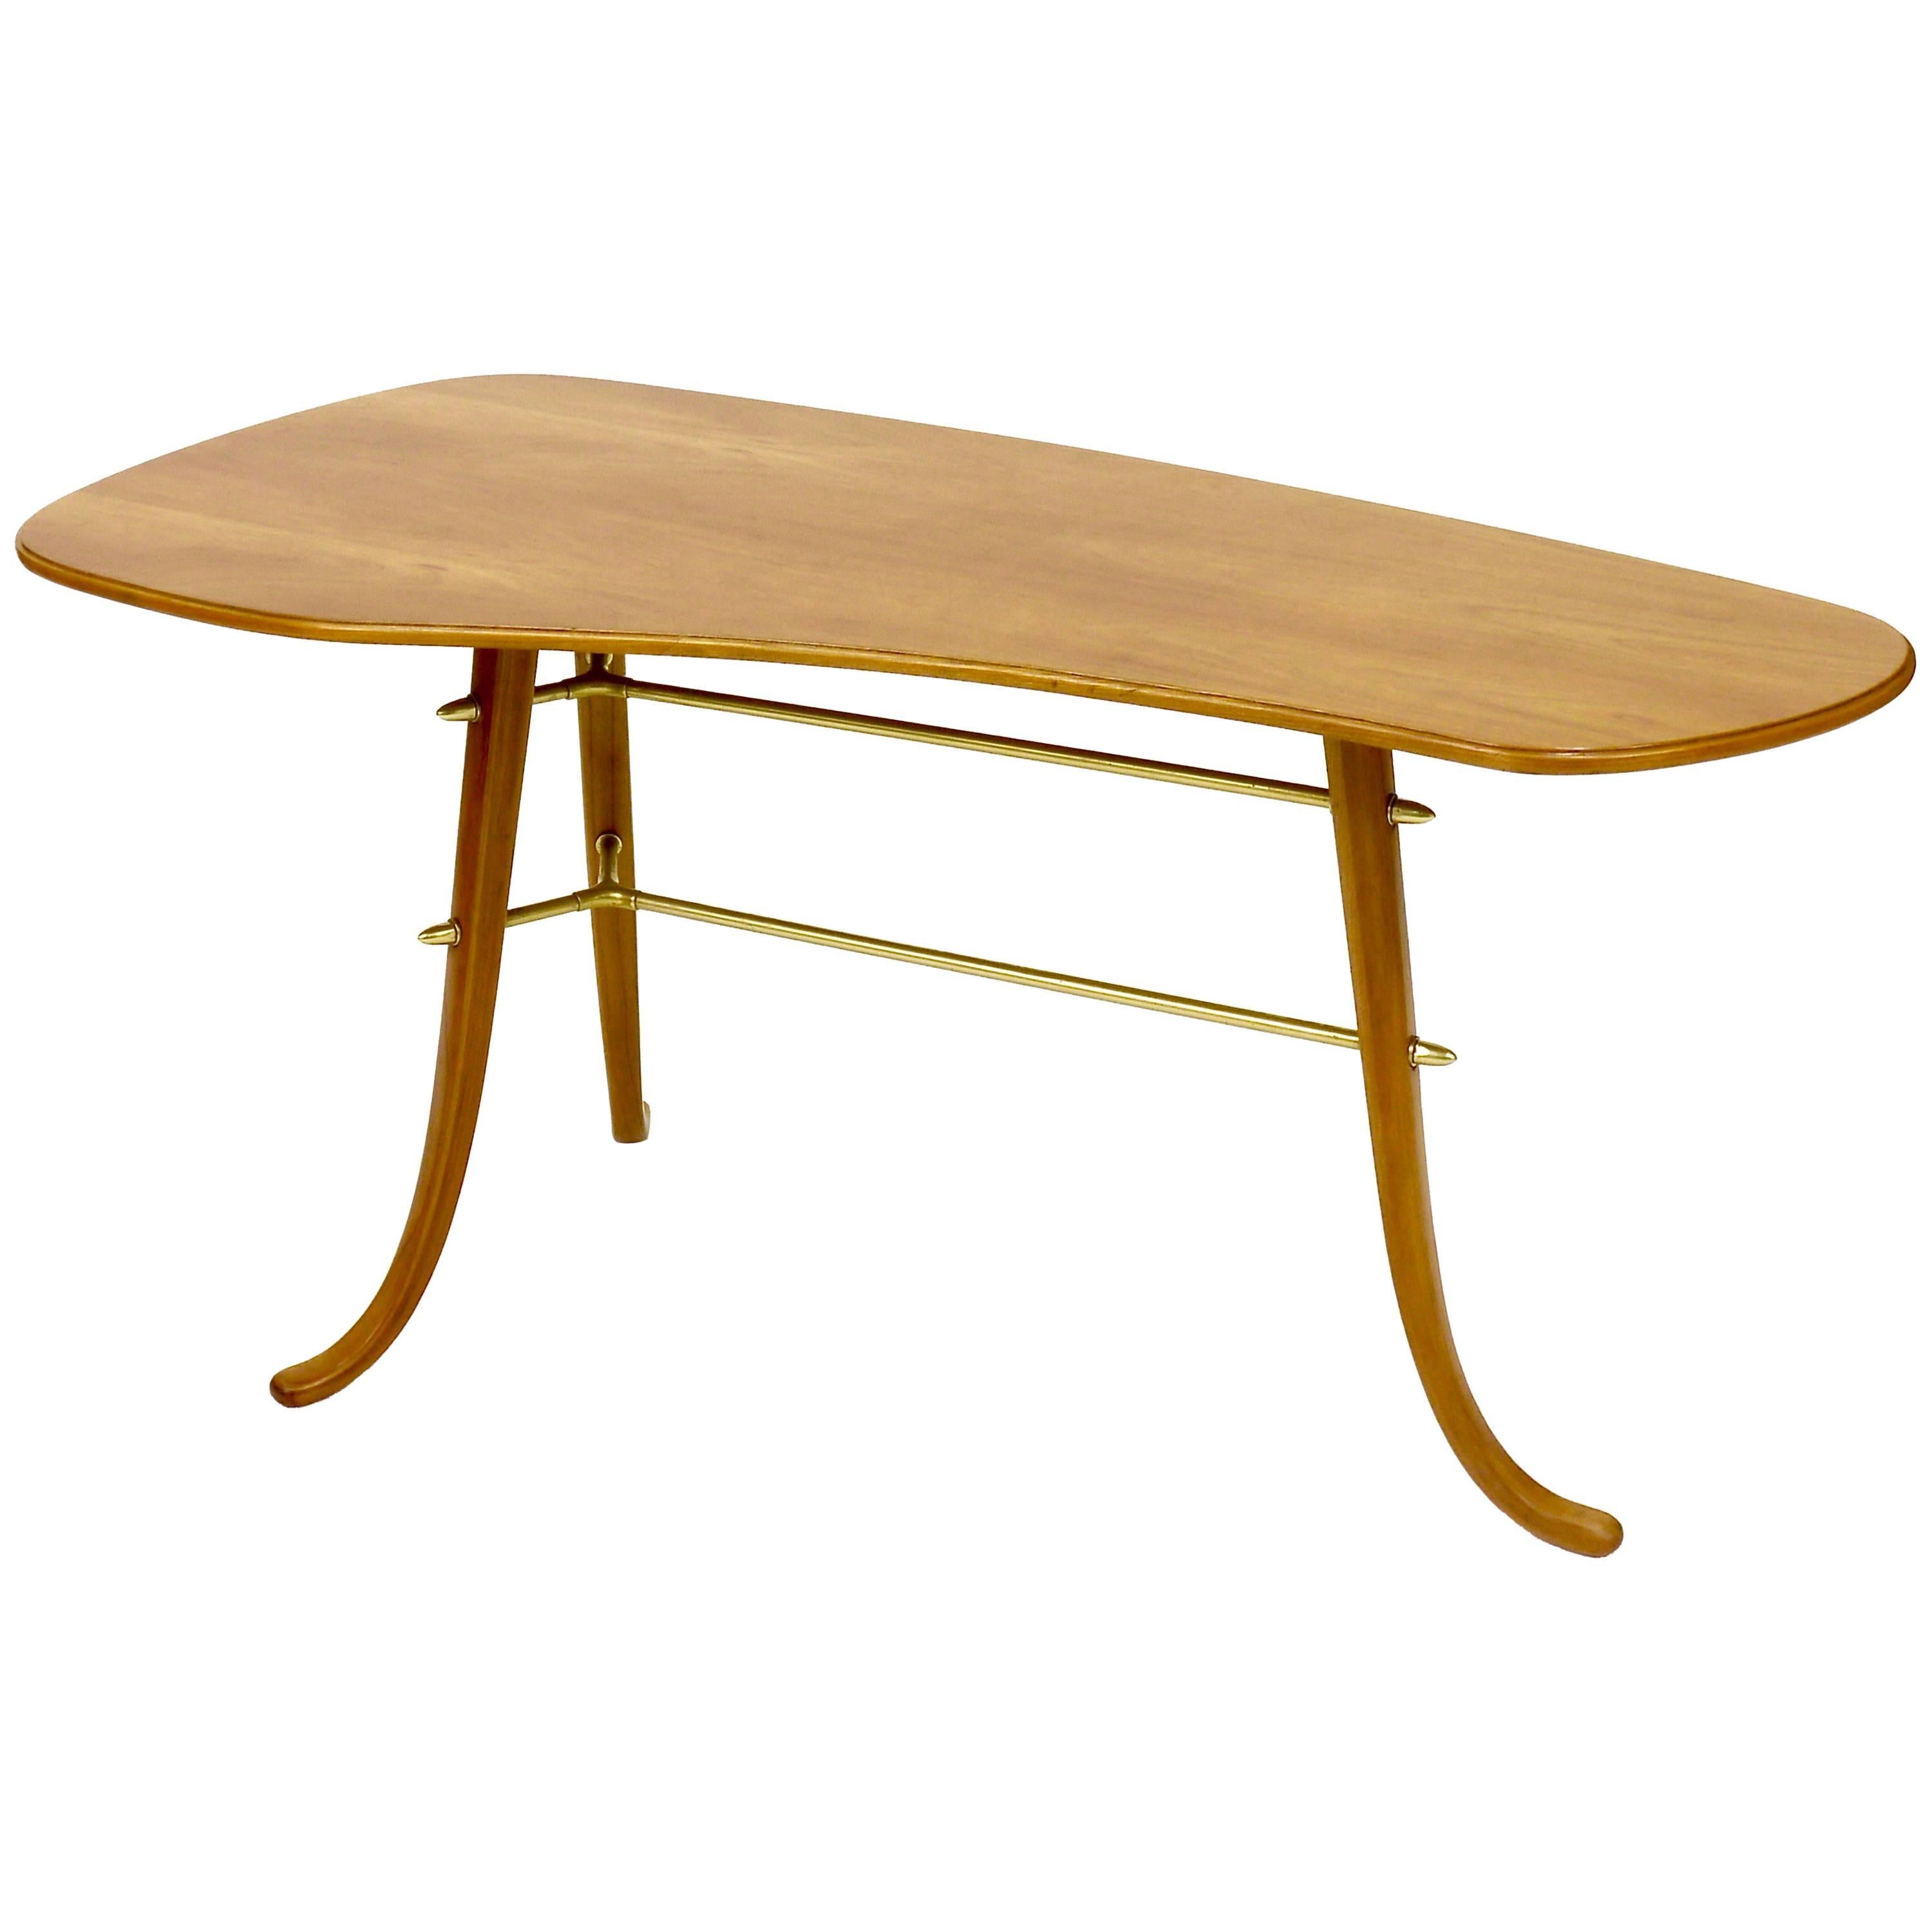 Swedish Modernist Coffee Table, Attributed to Josef Frank, 1950s